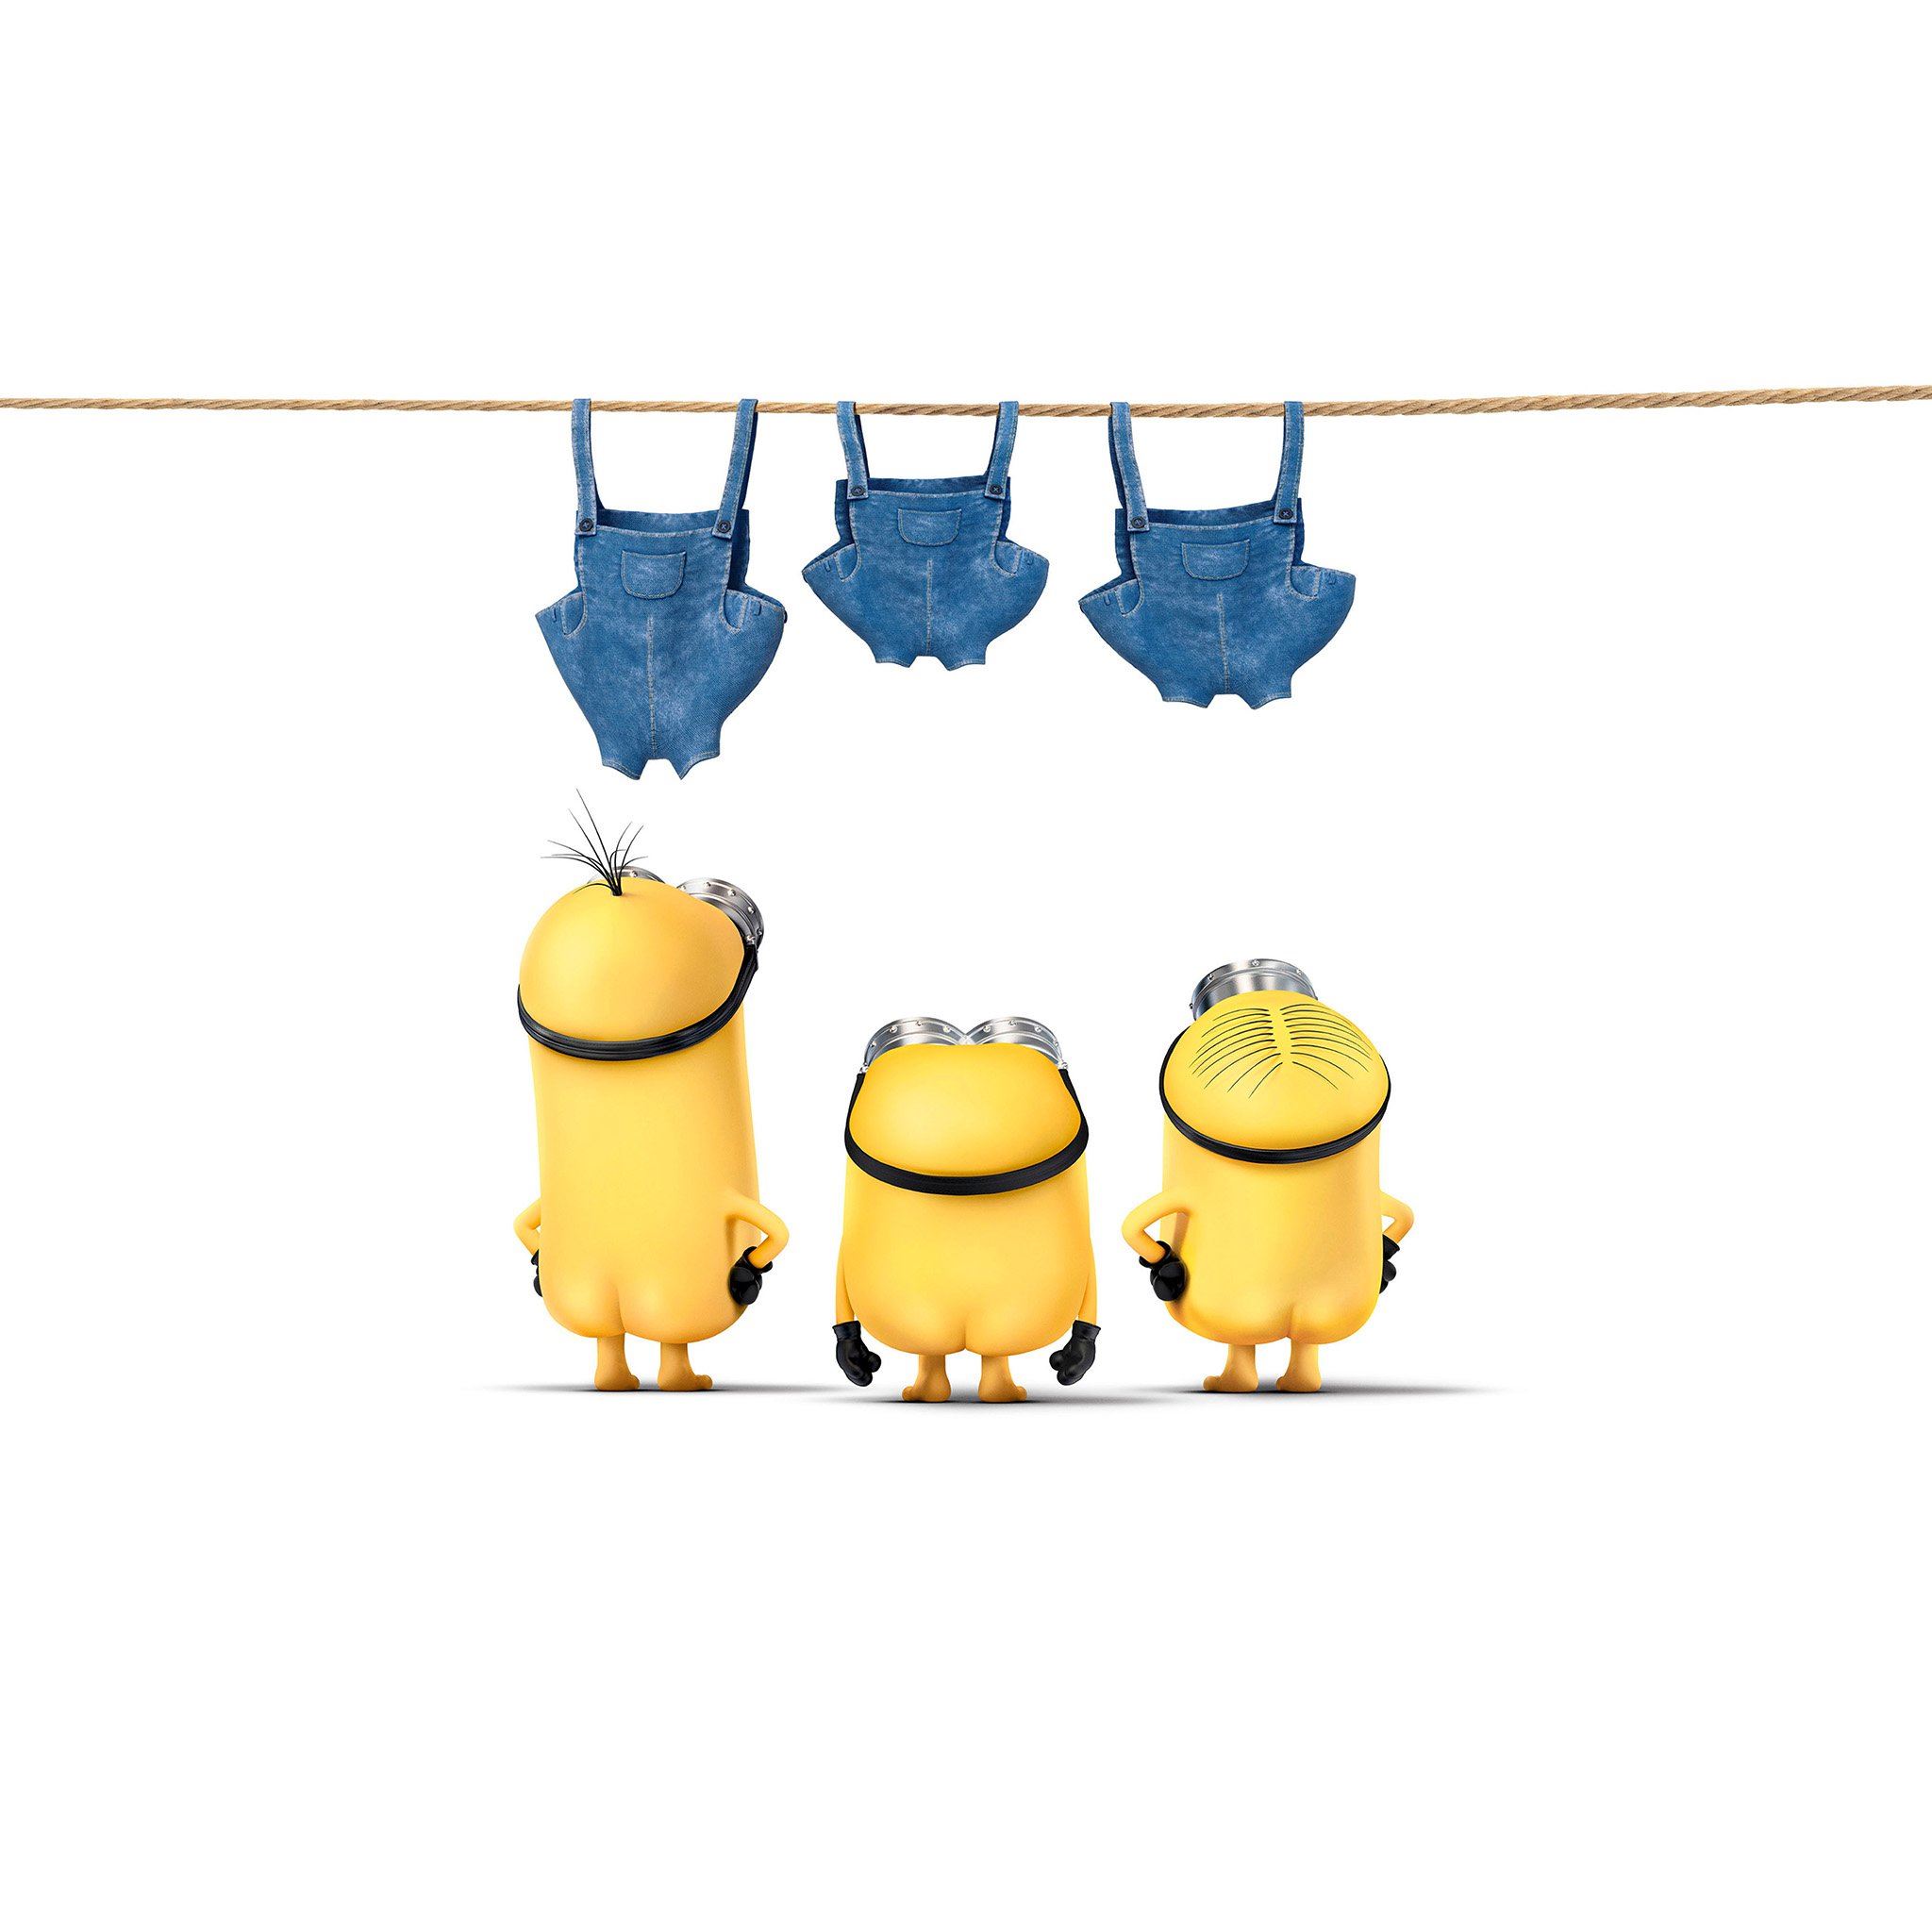 Minions Despicable Nude Me Cute Yellow Art Illustration iPad Air Wallpaper Free Download